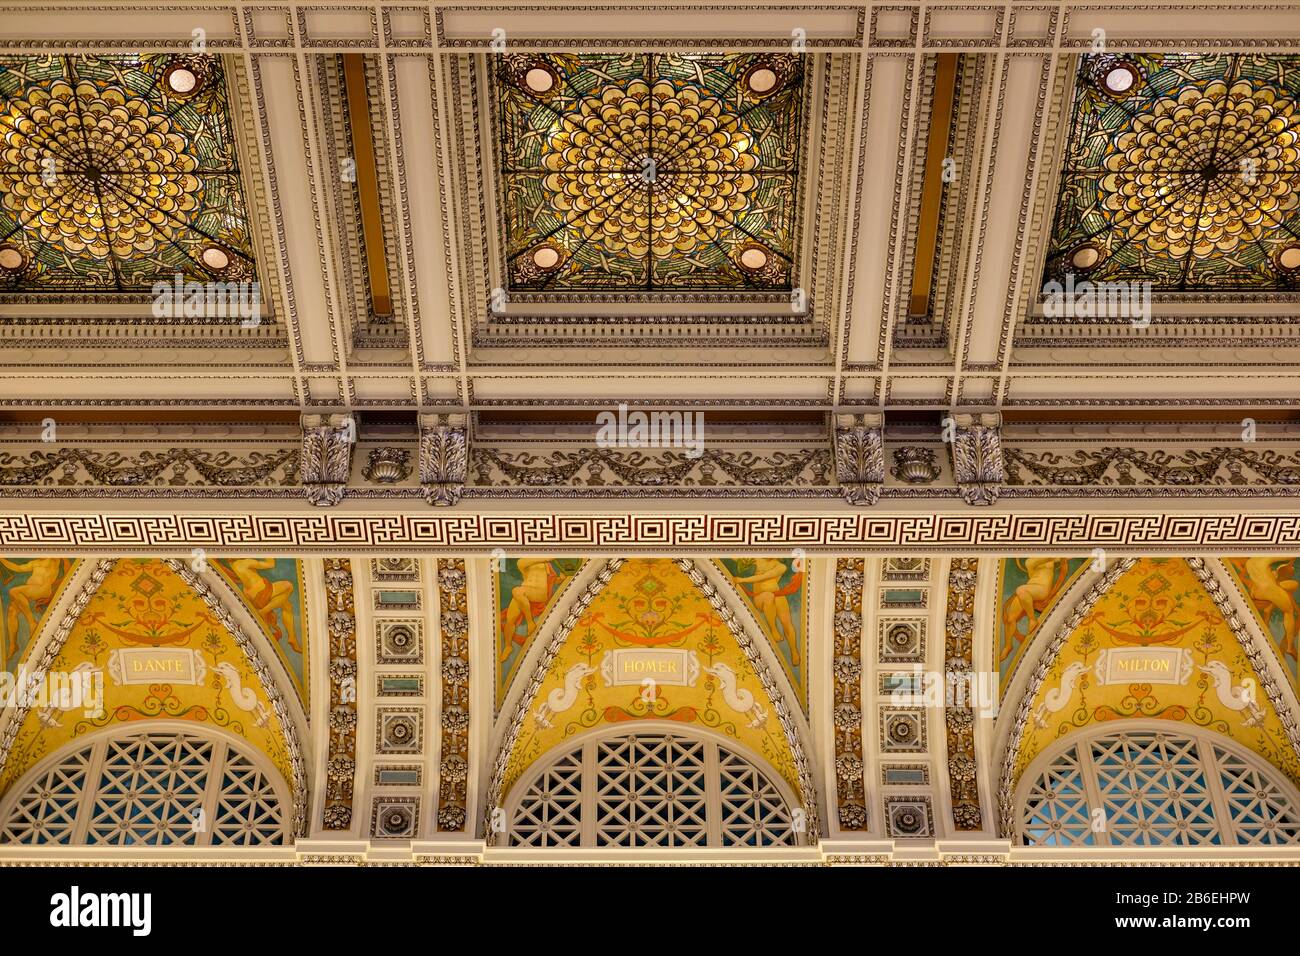 Detail of Library of Congress Great Hall ceiling, Thomas Jefferson Building, Washington, DC, USA. Stock Photo